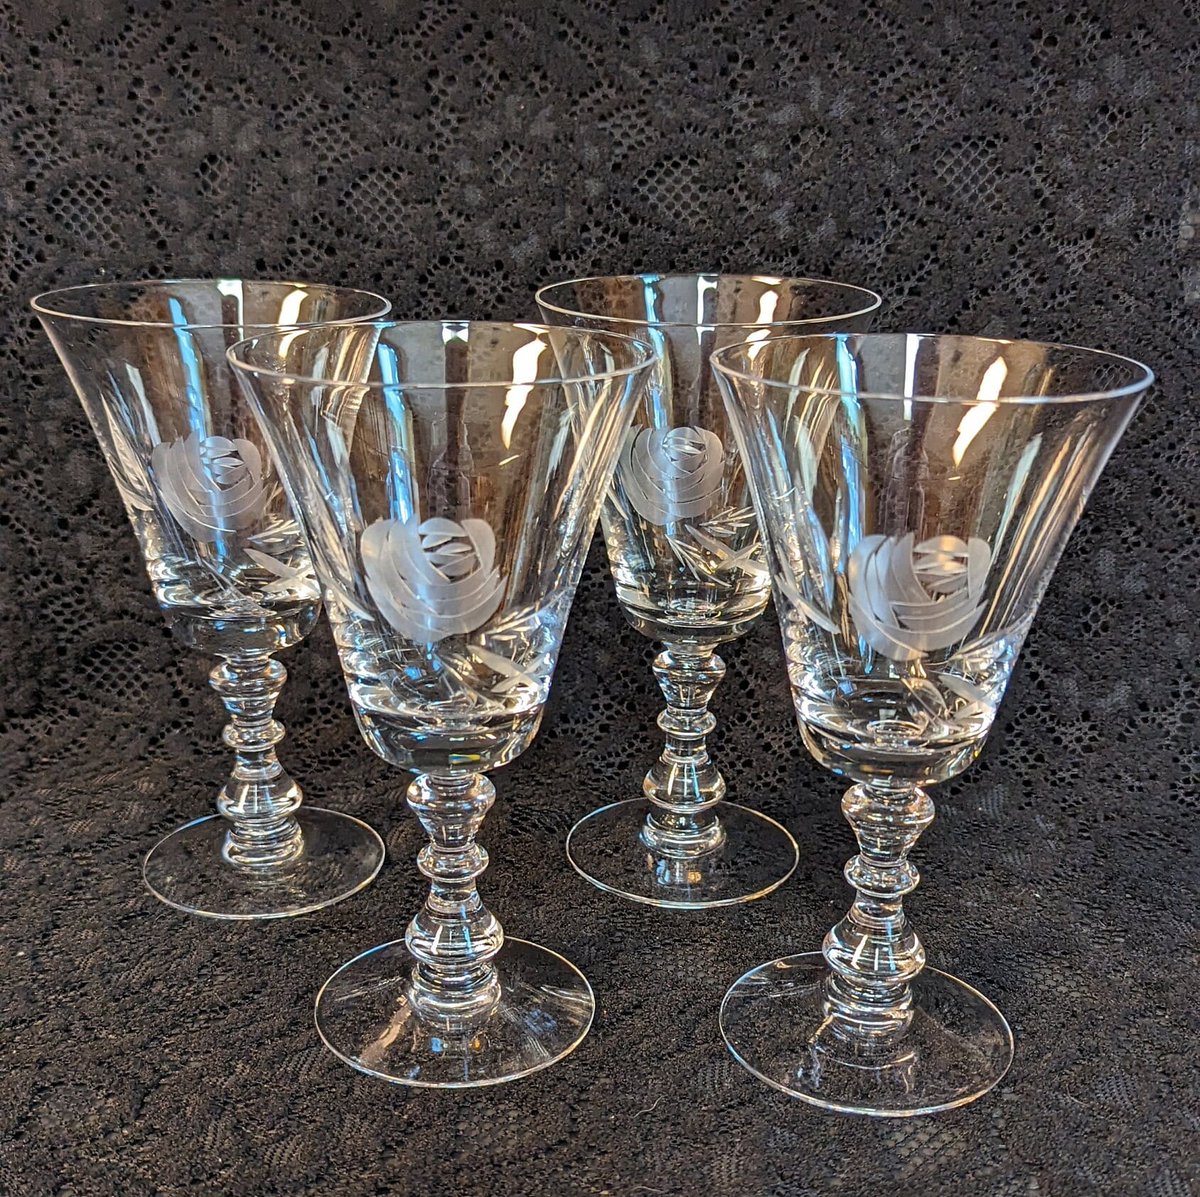 Set of 4 - Rare FOSTORIA Rose Pattern, Etched Hand-Blown Crystal Water Glass,  6 3/4' Tall, Holds 8 oz., Mid-Century, 2 Sets Available, MINT tuppu.net/f392cc89 #AmazingFunVintage #Etsy #McmBarware